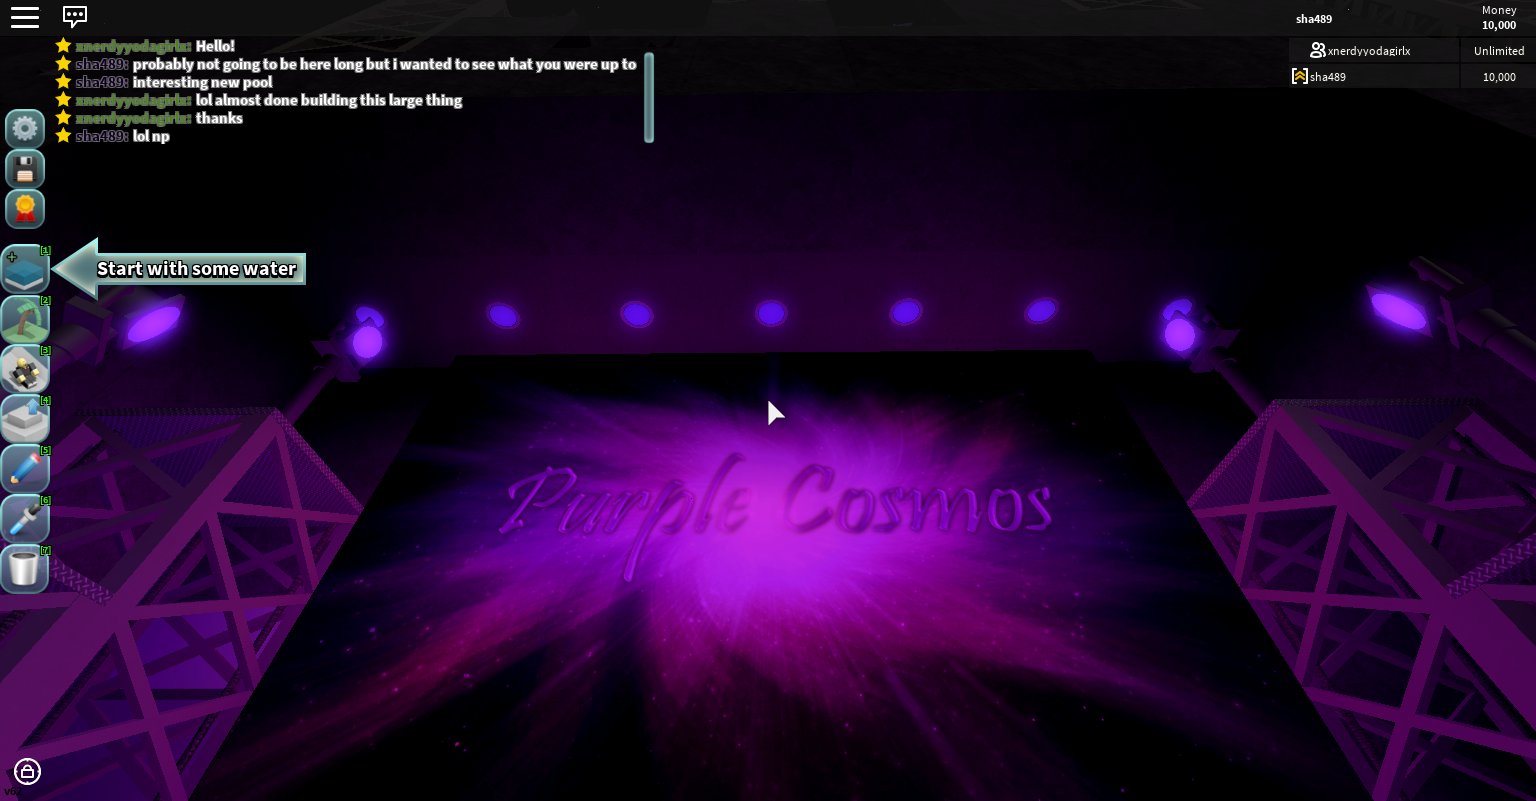 Tpt2 Best Of Parks On Twitter Purple Cosmos By Xnerdyyodagirlx Has Some Amazing Decals And A Creative Idea To Her Pool - decals for theme park tycoon 2 tpt2 roblox decals